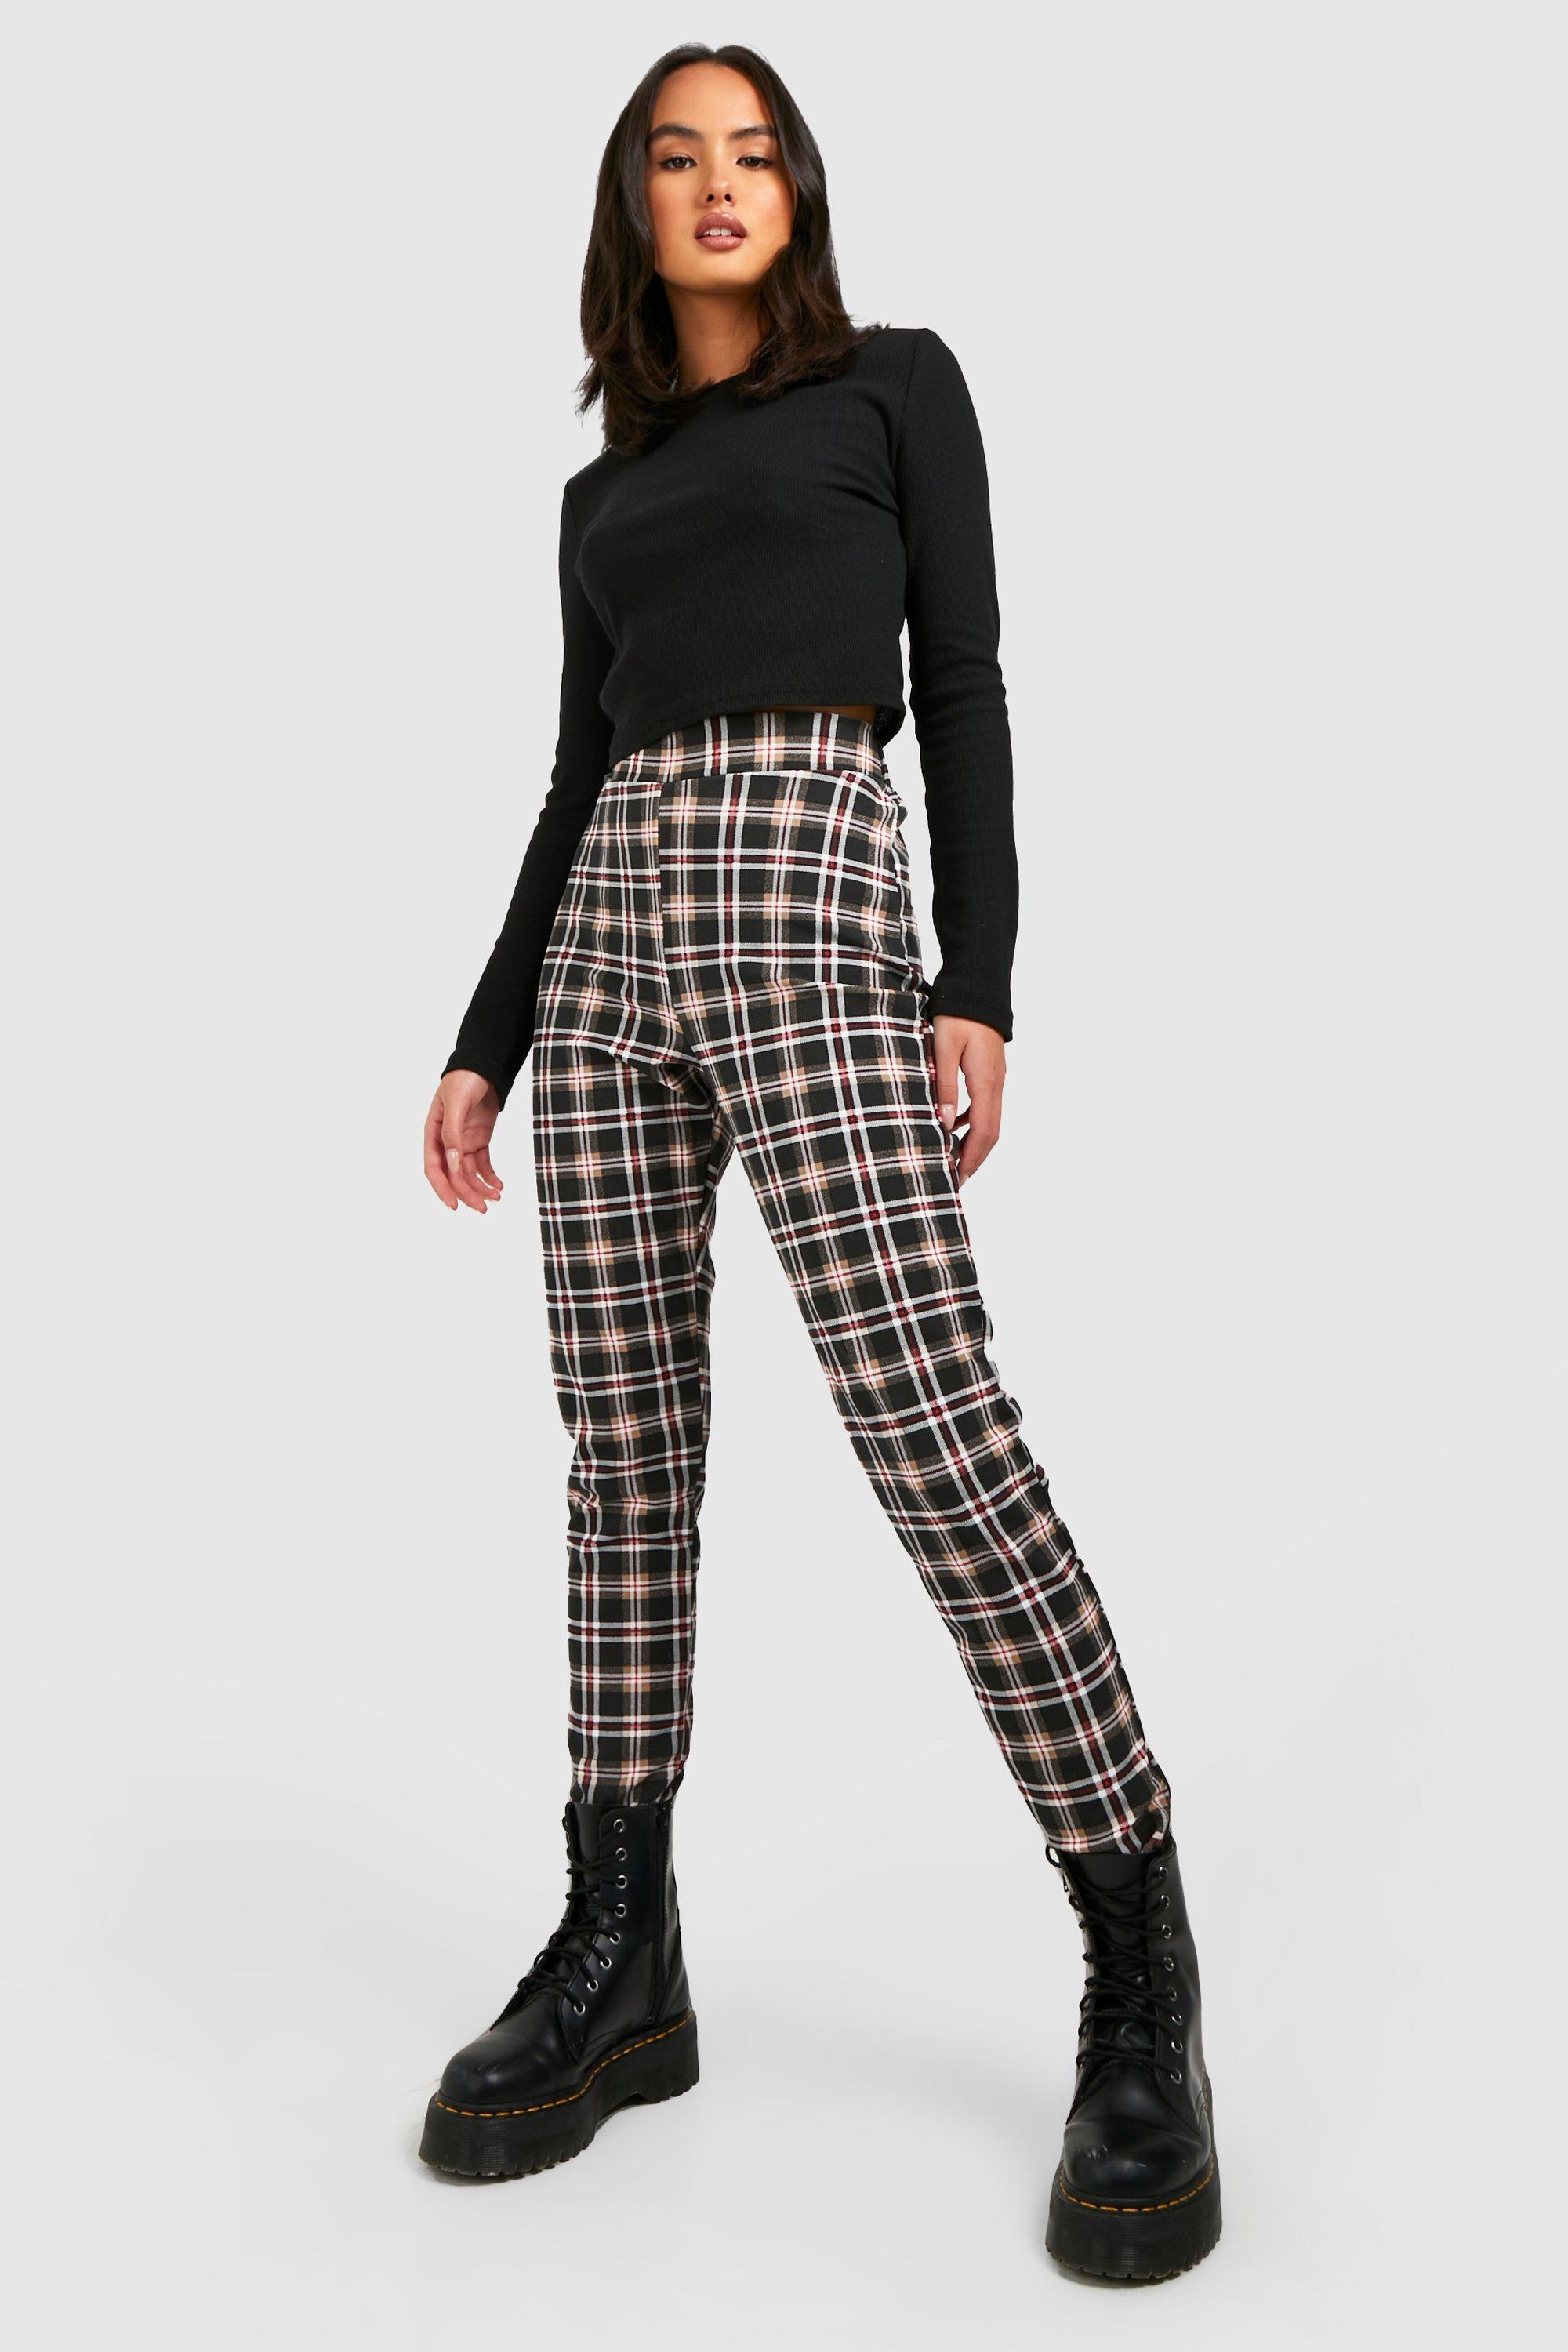 Best Deal for Check Trousers Women Trousers Pants Ladies Black Trousers